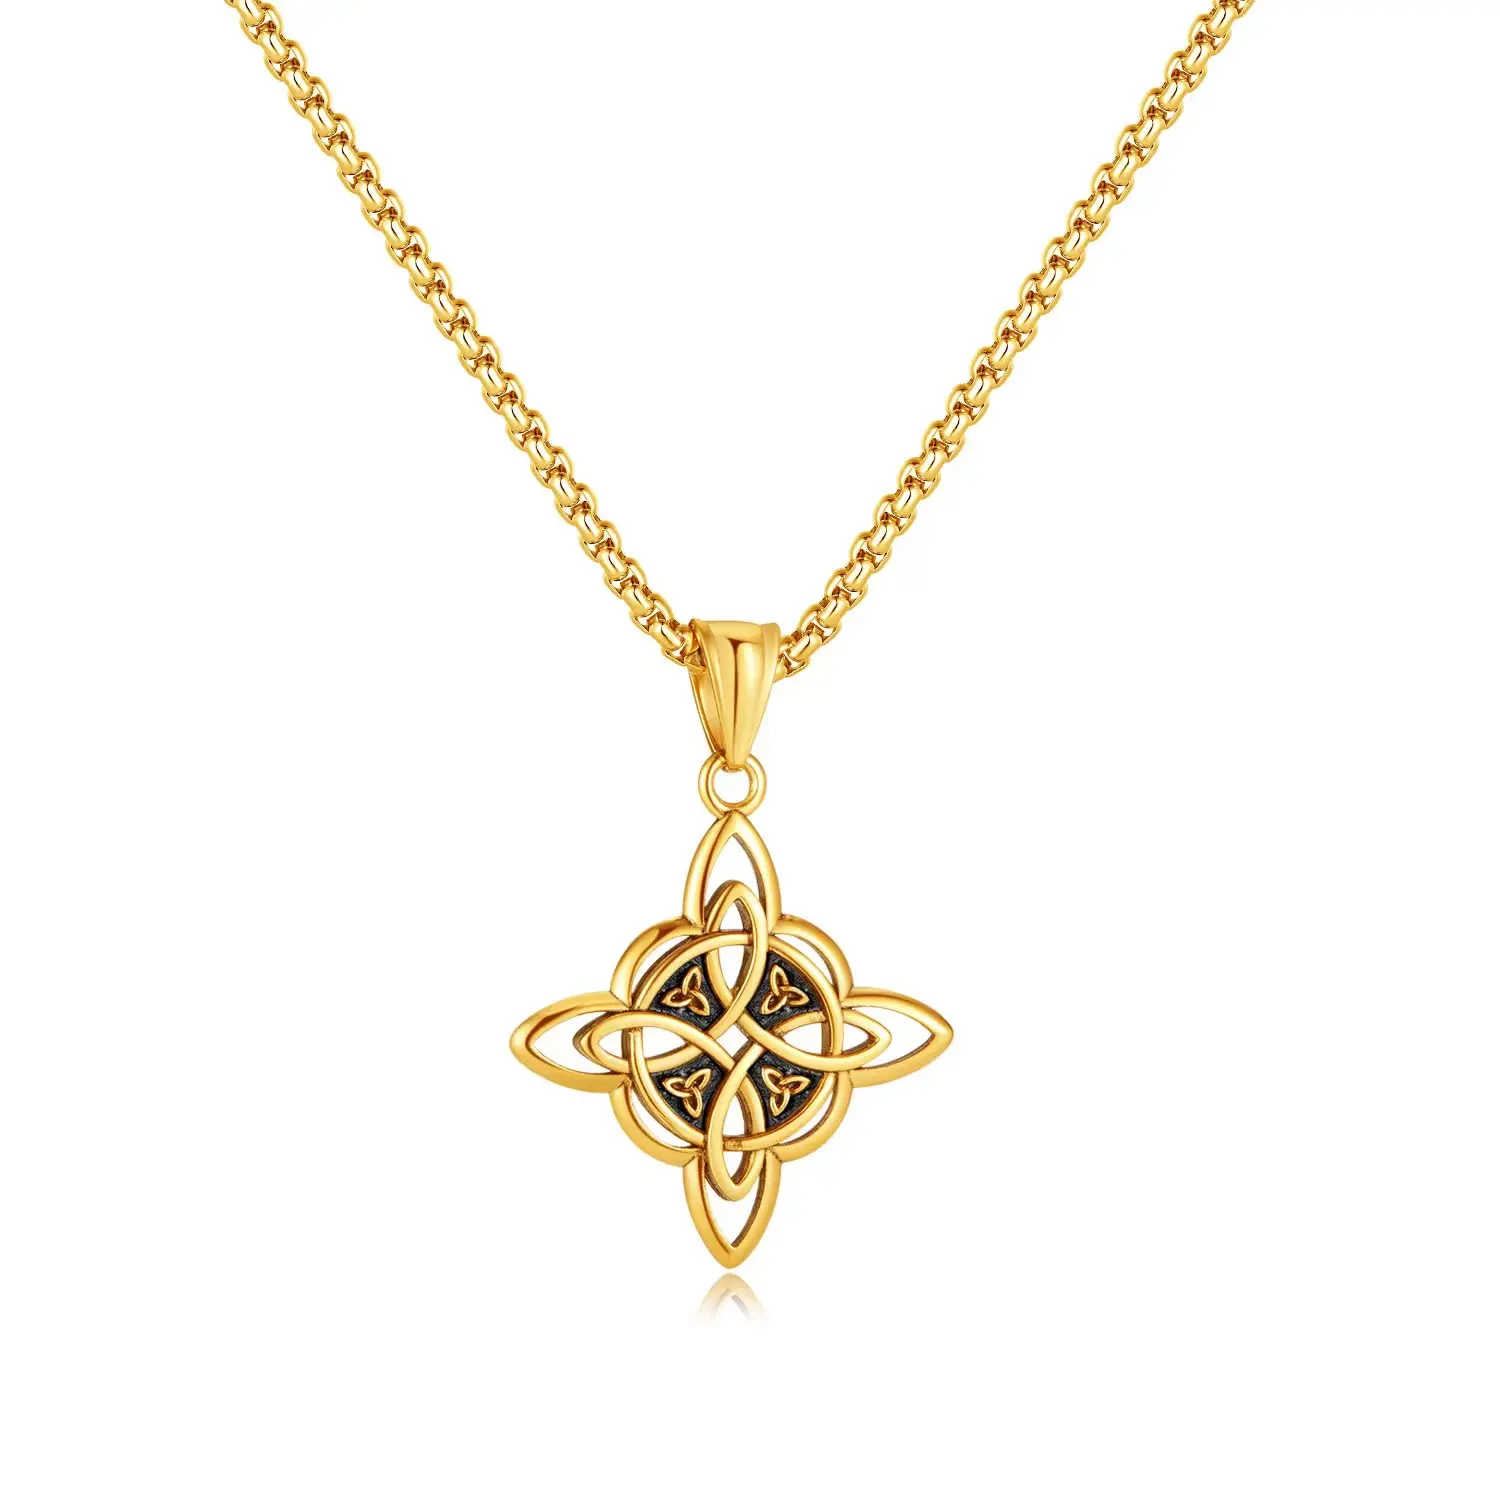 Wholesale price vintage titanium jewelry gold plated stainless steel celtic knot men's pendant necklace